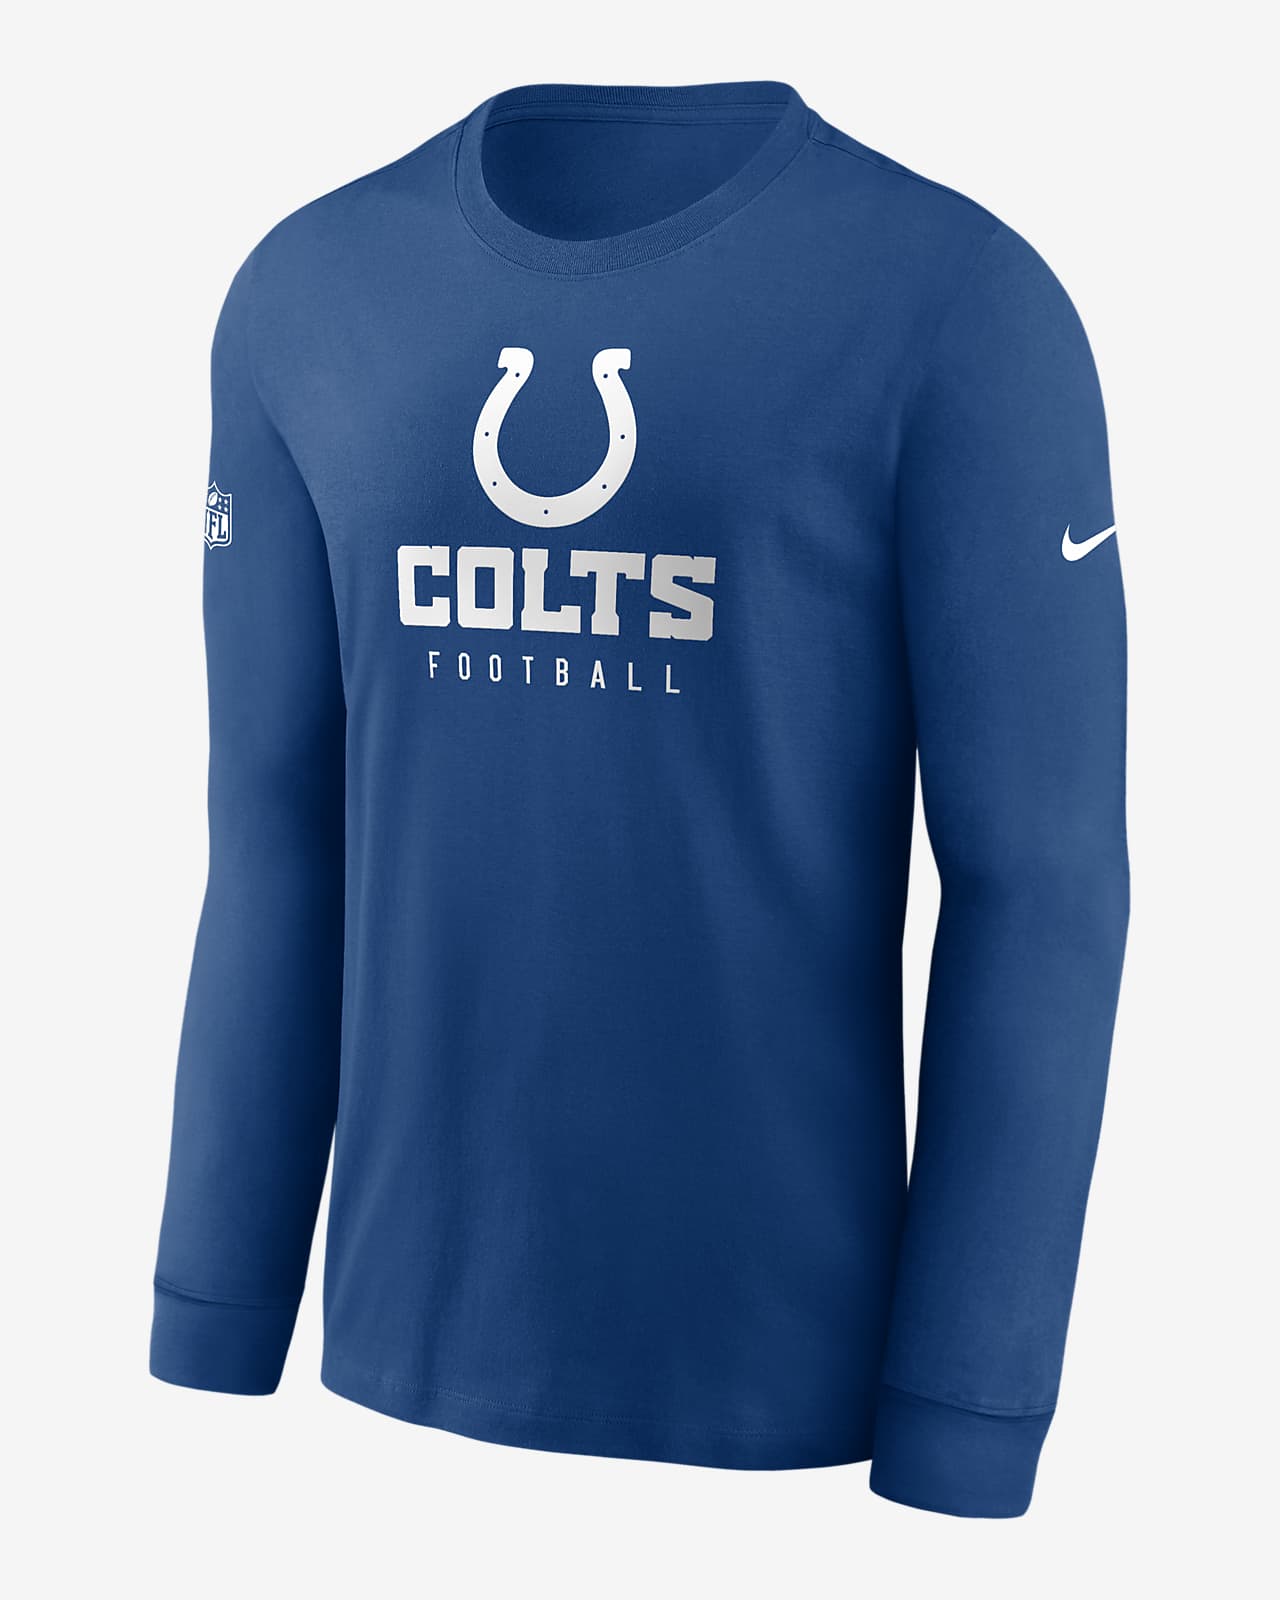 Nike Dri-FIT Sideline Team (NFL Indianapolis Colts) Men's Long-Sleeve  T-Shirt